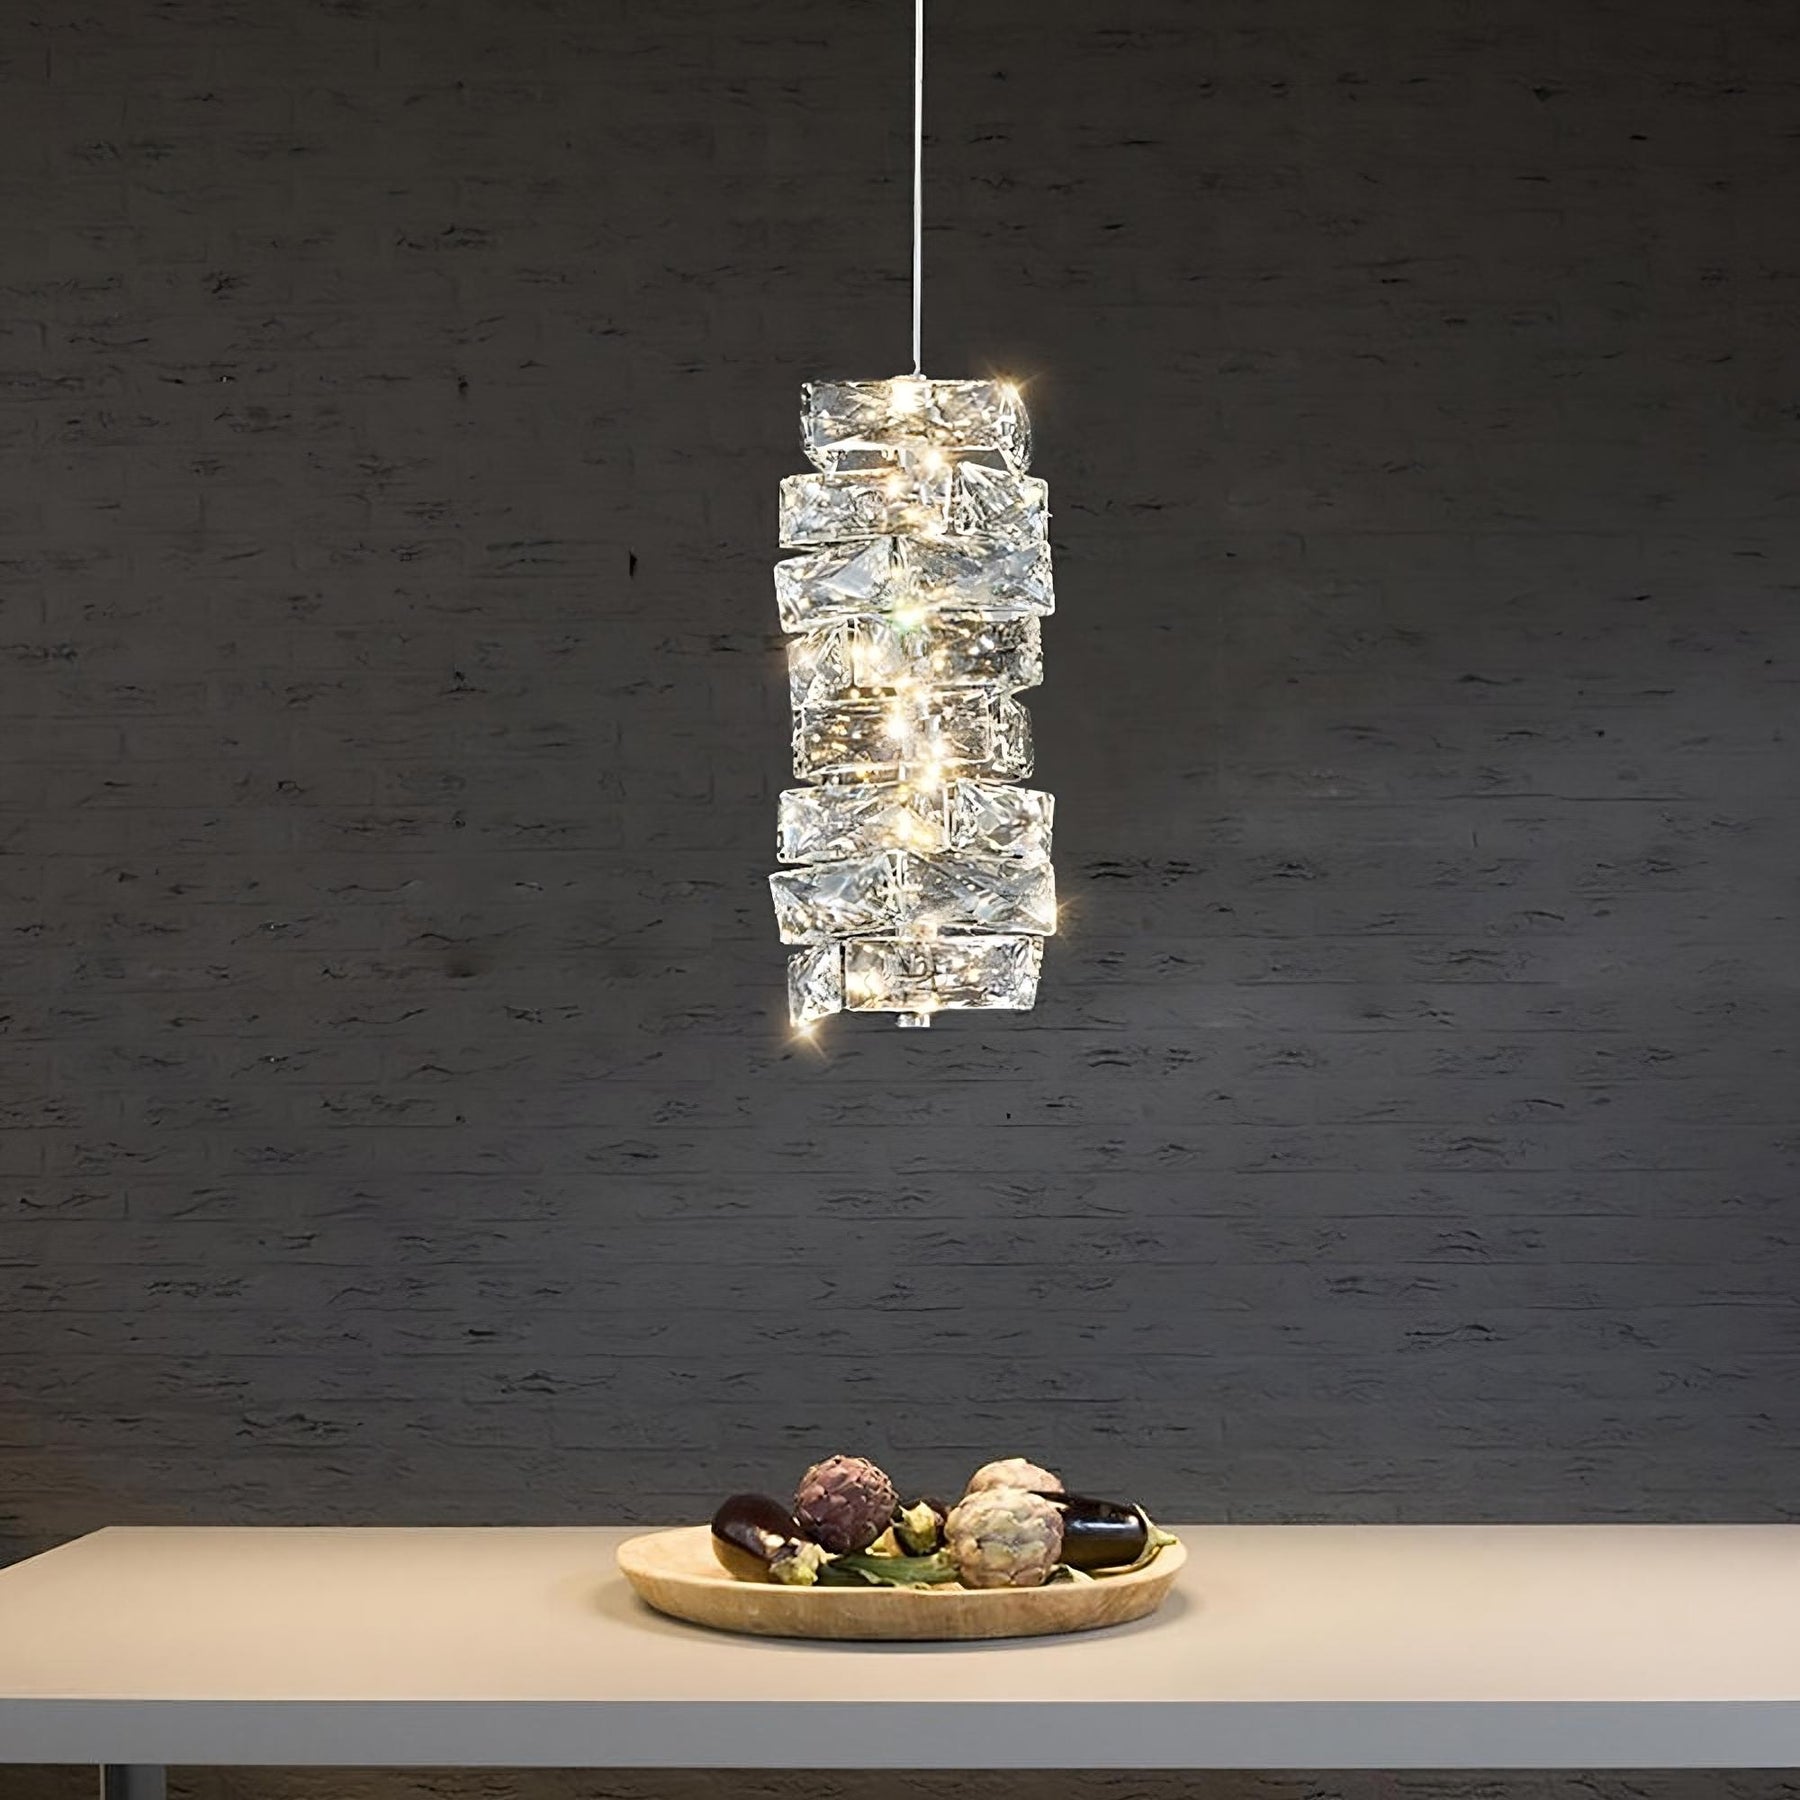 A modern, rectangular Bacci Crystal Pendant Light Fixture by Morsale.com featuring a geometric glass design and handmade crystals hangs from the ceiling over a minimalist table. On the table is a round wooden tray holding various vegetables, including eggplants and artichokes, set against a dark brick wall background.